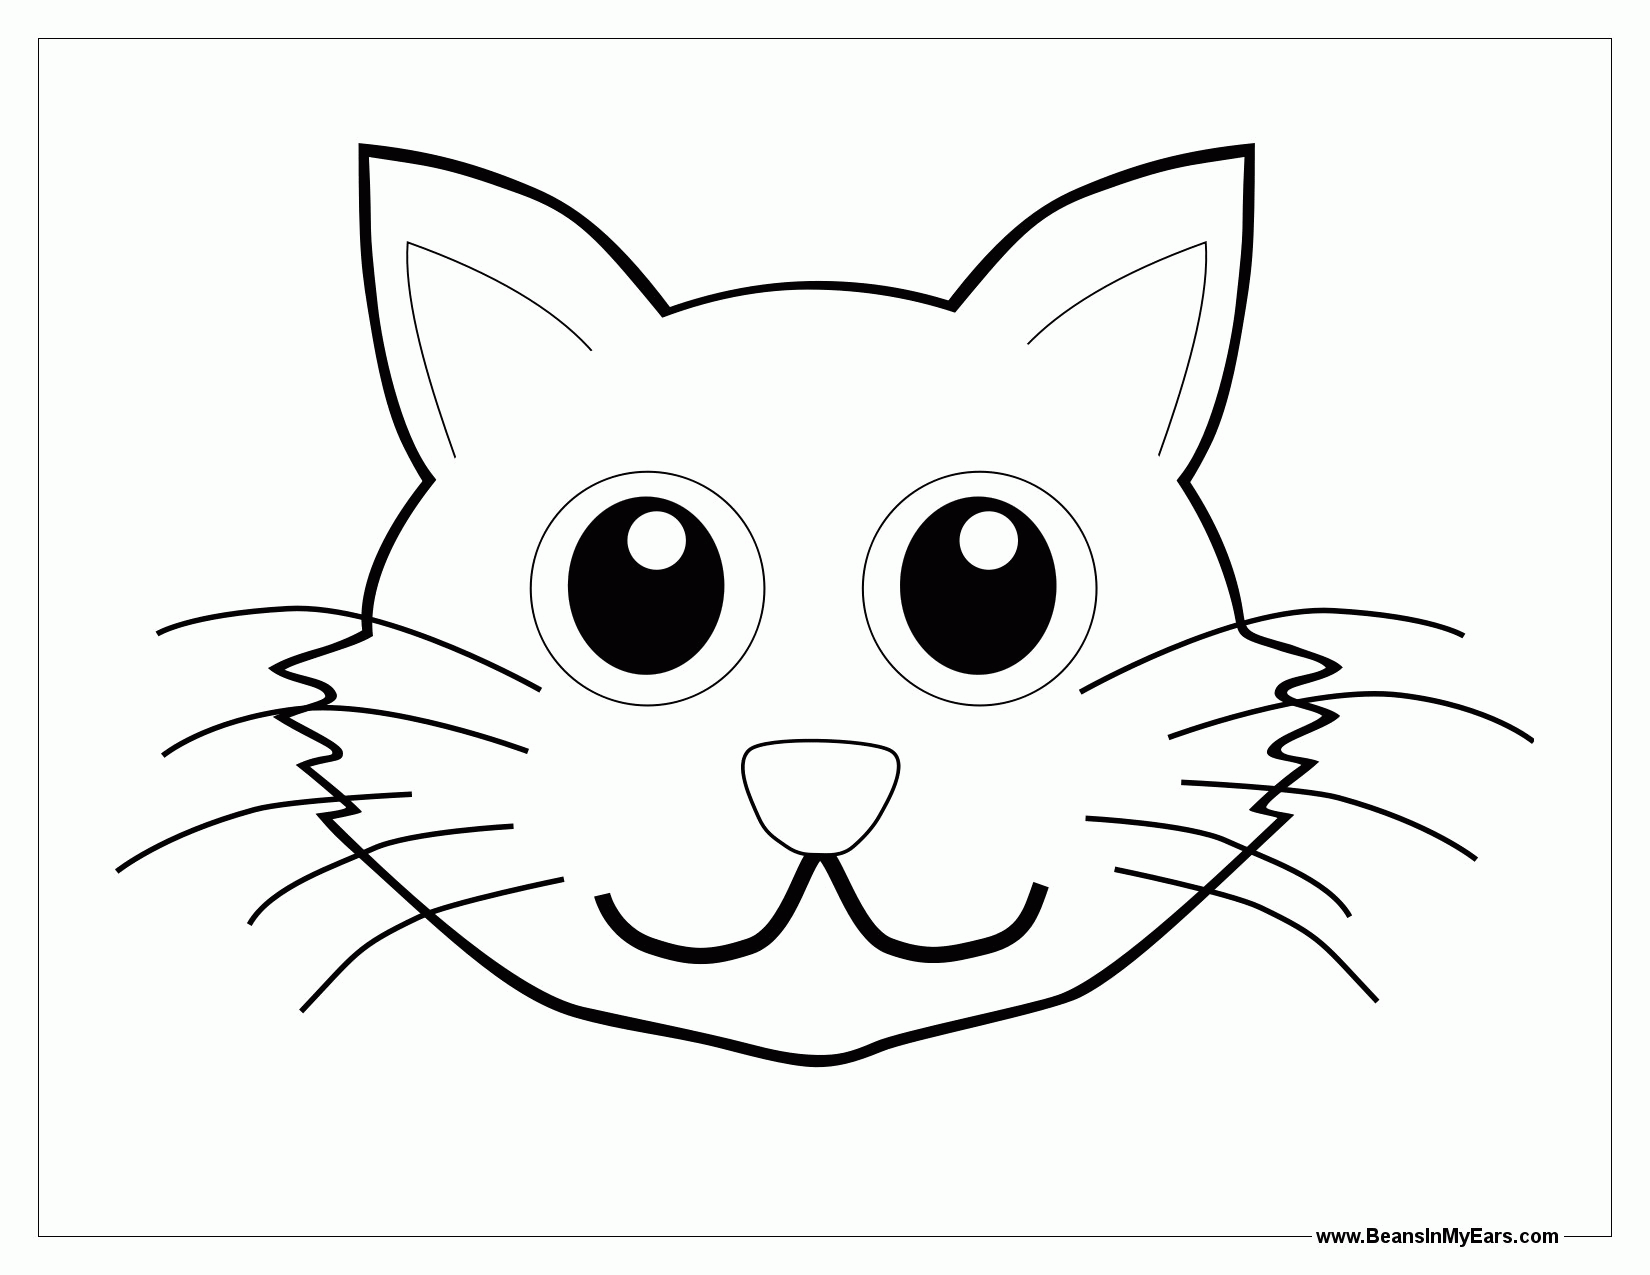 The Cat In The Hat Coloring Pages (13 Pictures) - Colorine.net | 5502